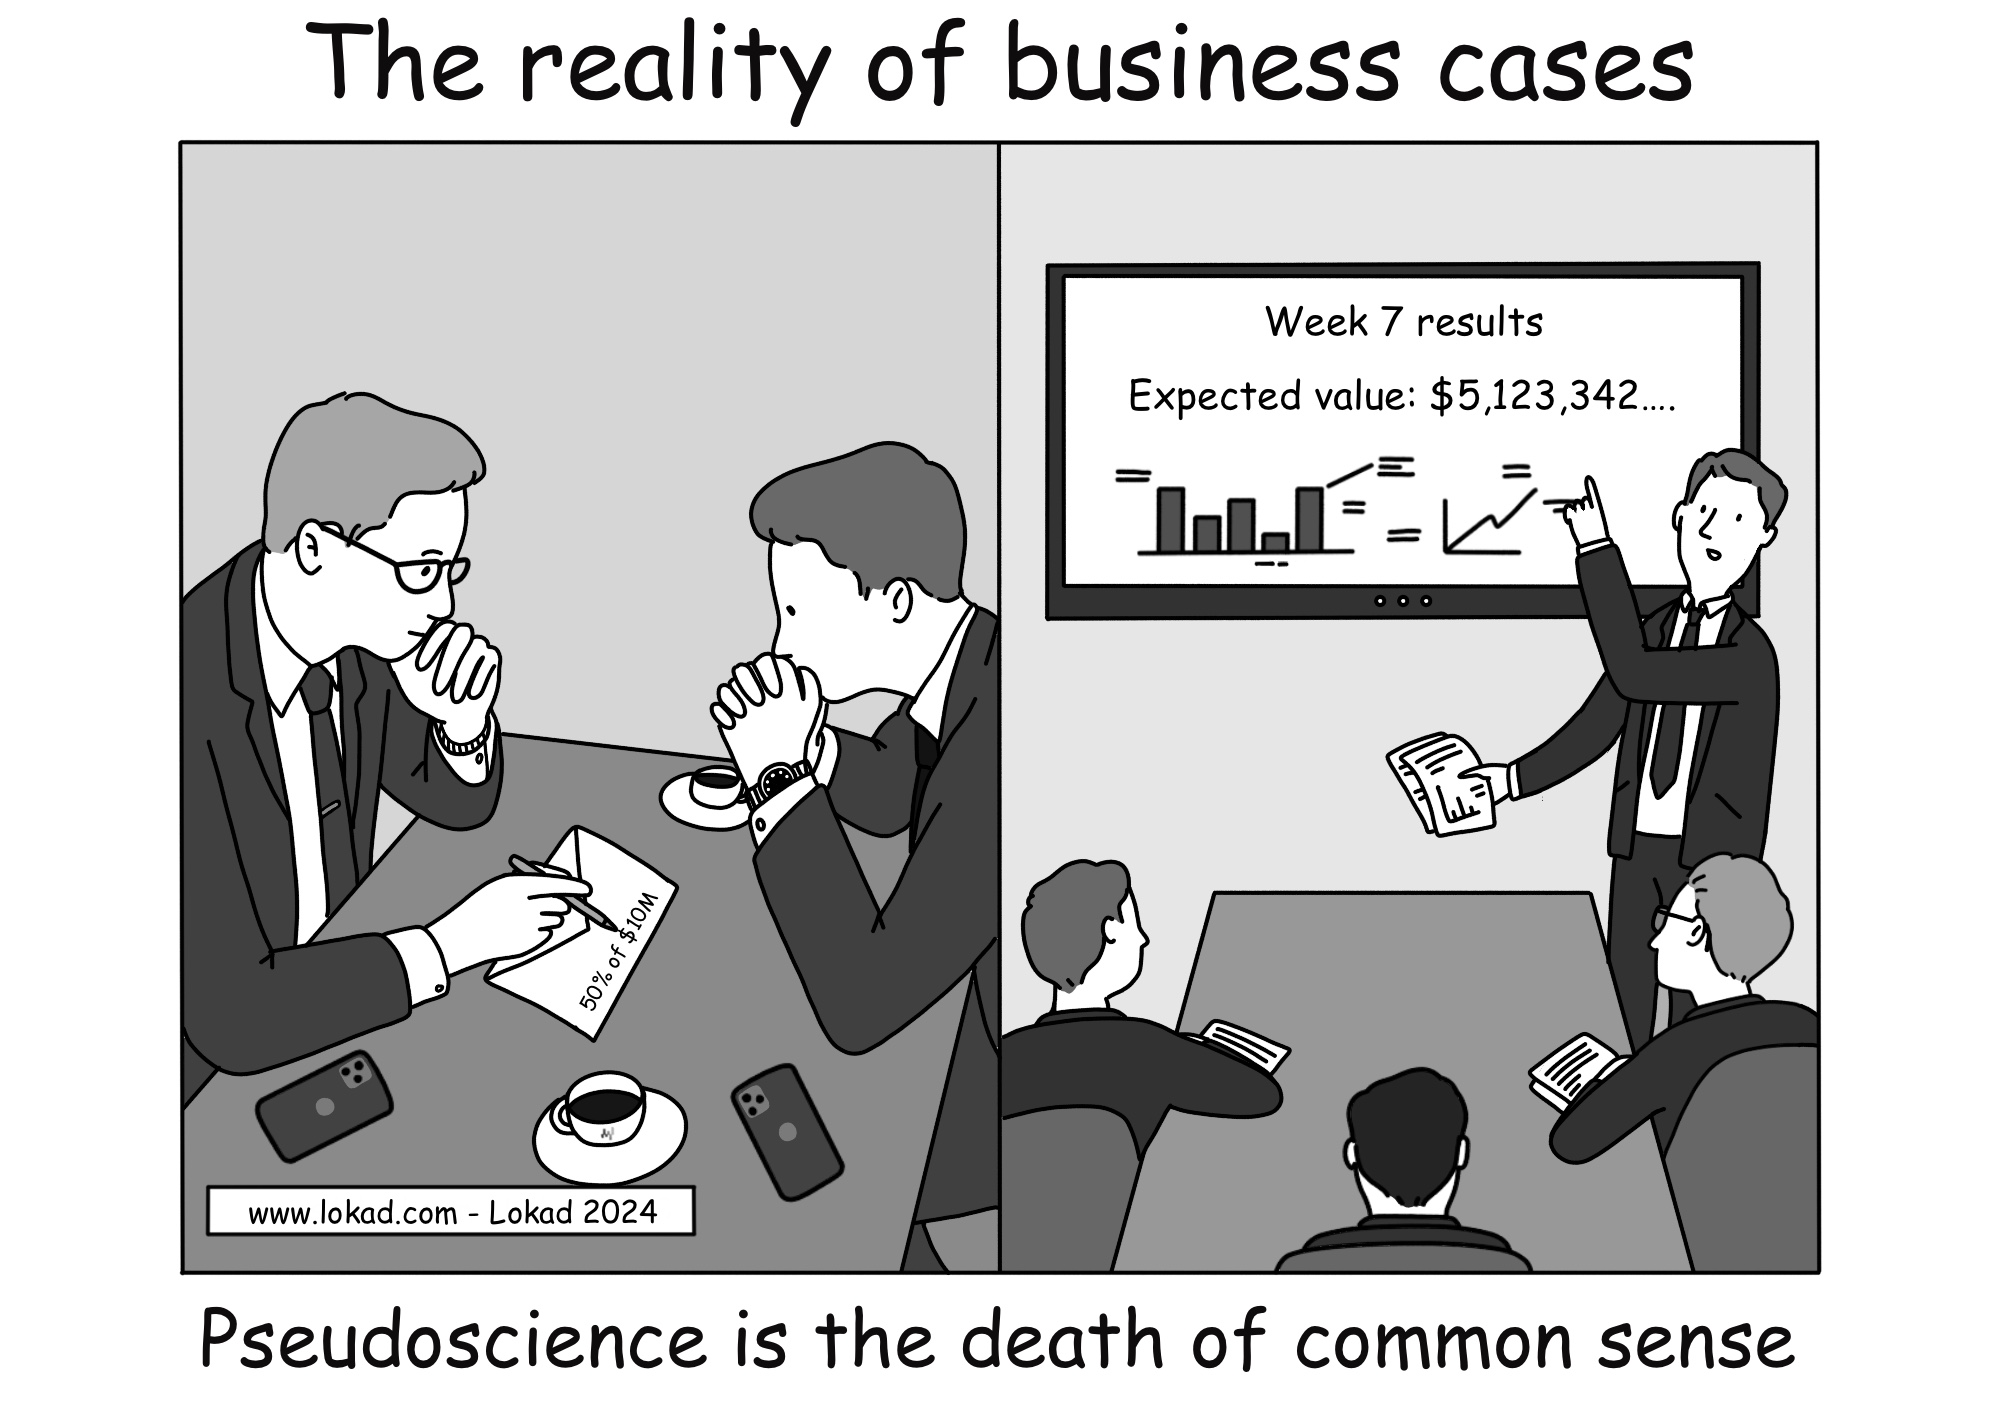 The reality of business cases.